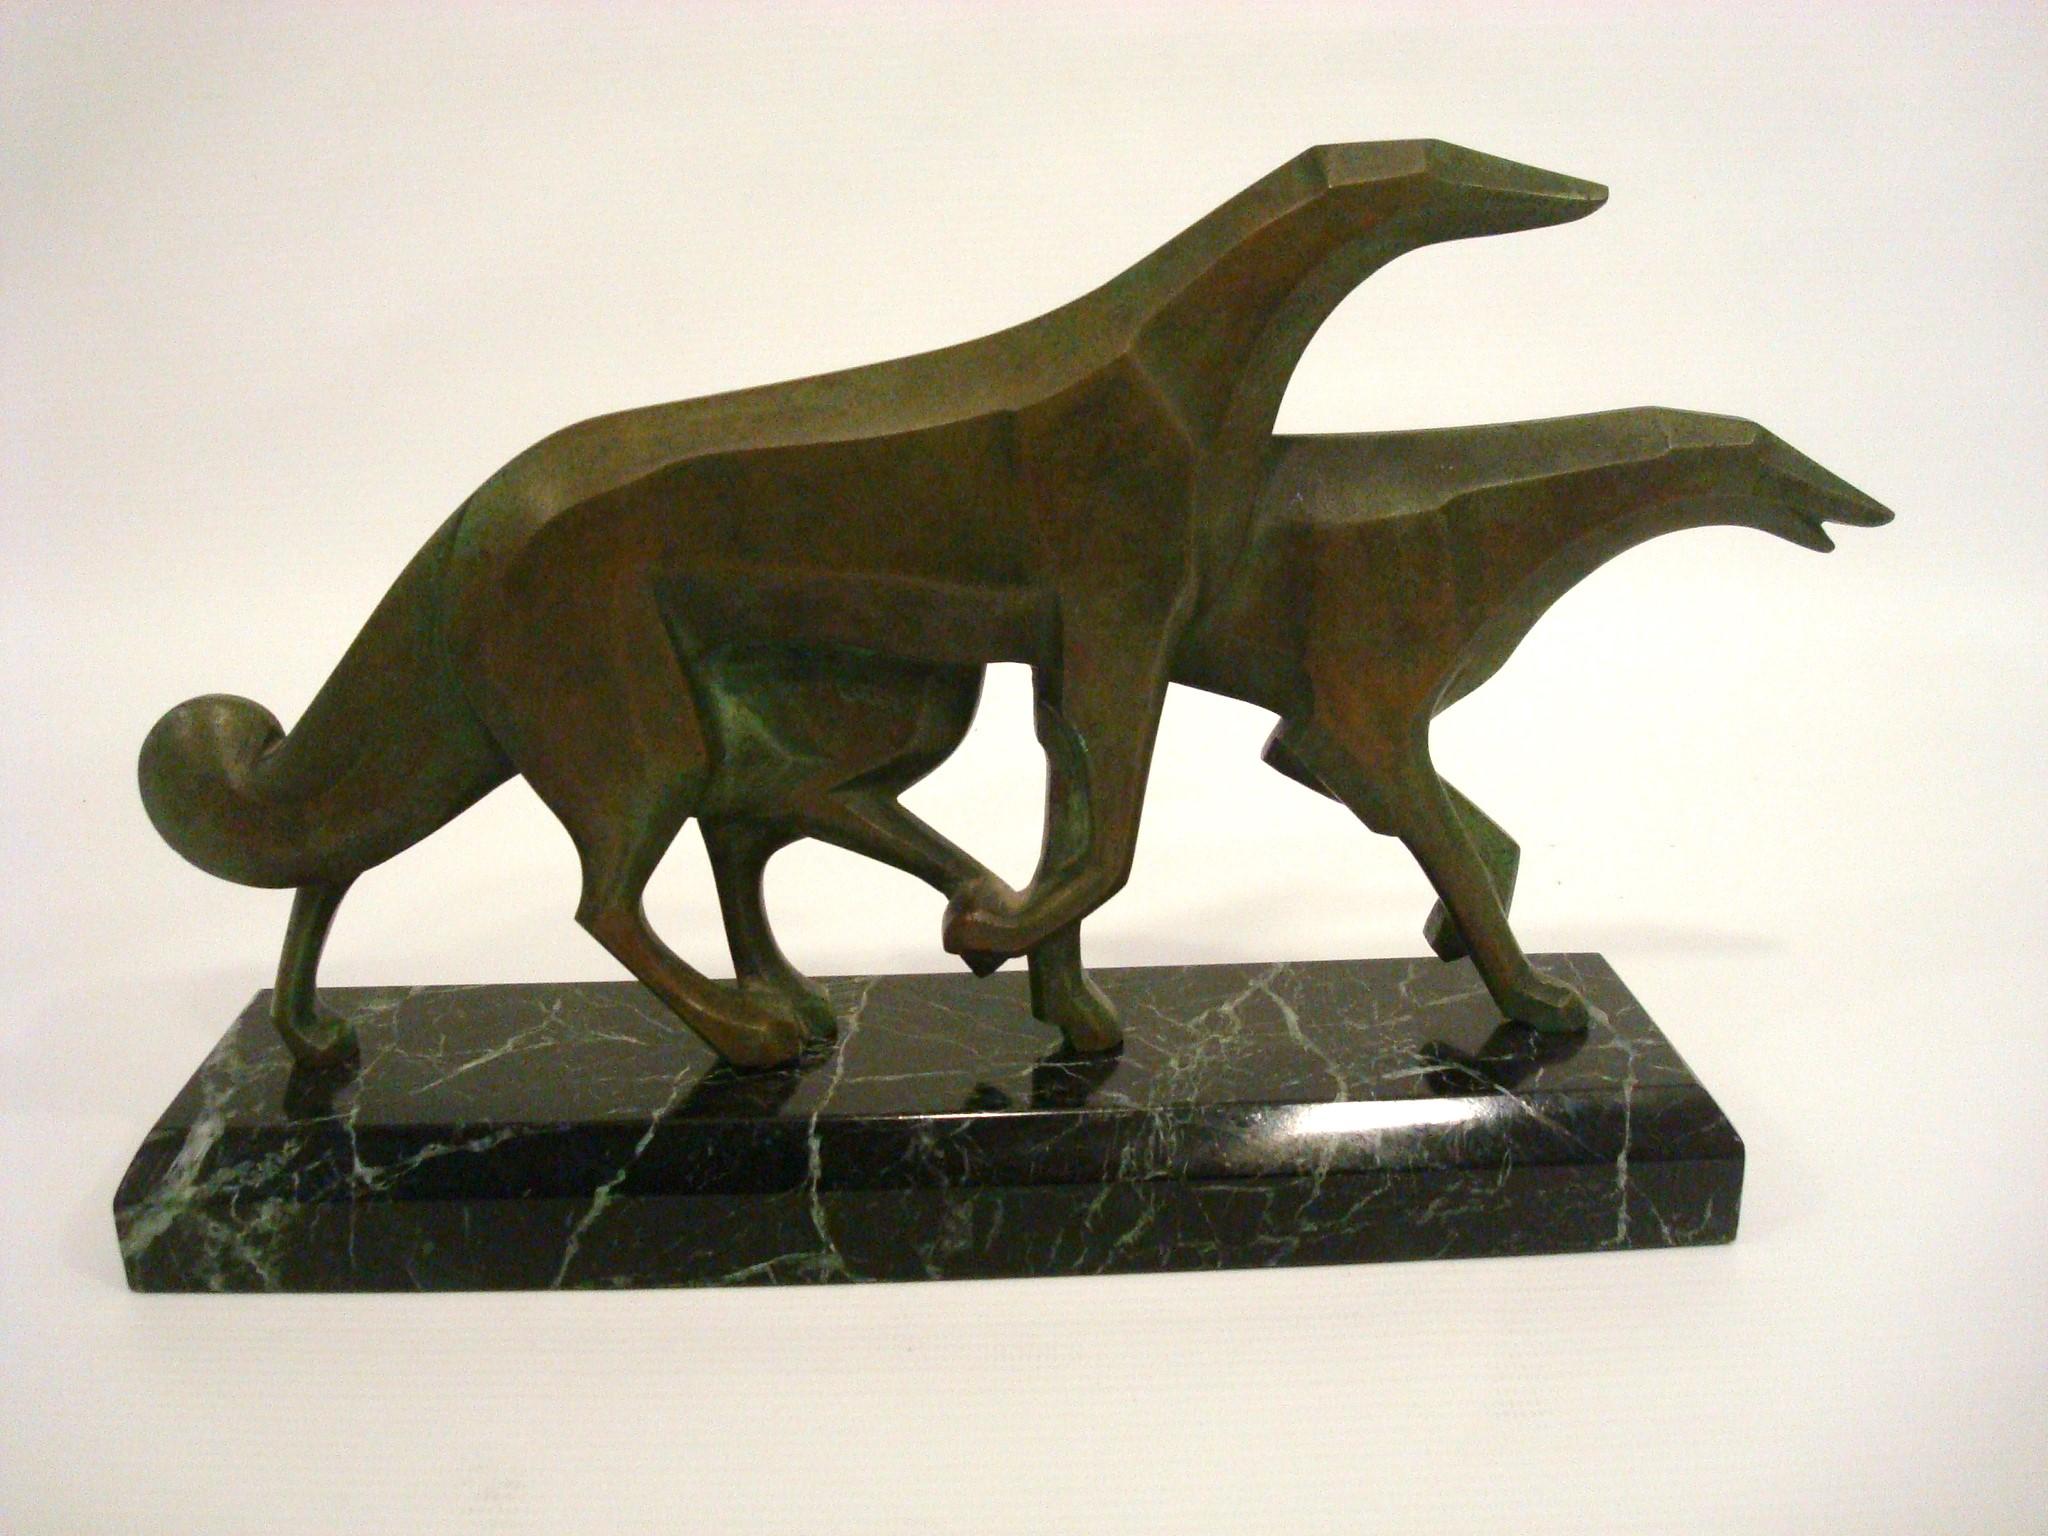 Art Deco Pair of Russian Borzoi Bronze sculpture. P. Rossi Italy 1950´s.
High Quality Bronze Sculpture of a pair of dogs, mounted over a green marble base. Very nice to use as a paperweight on a desk.

The Borzoi or Russian Hunting Sighthound is a